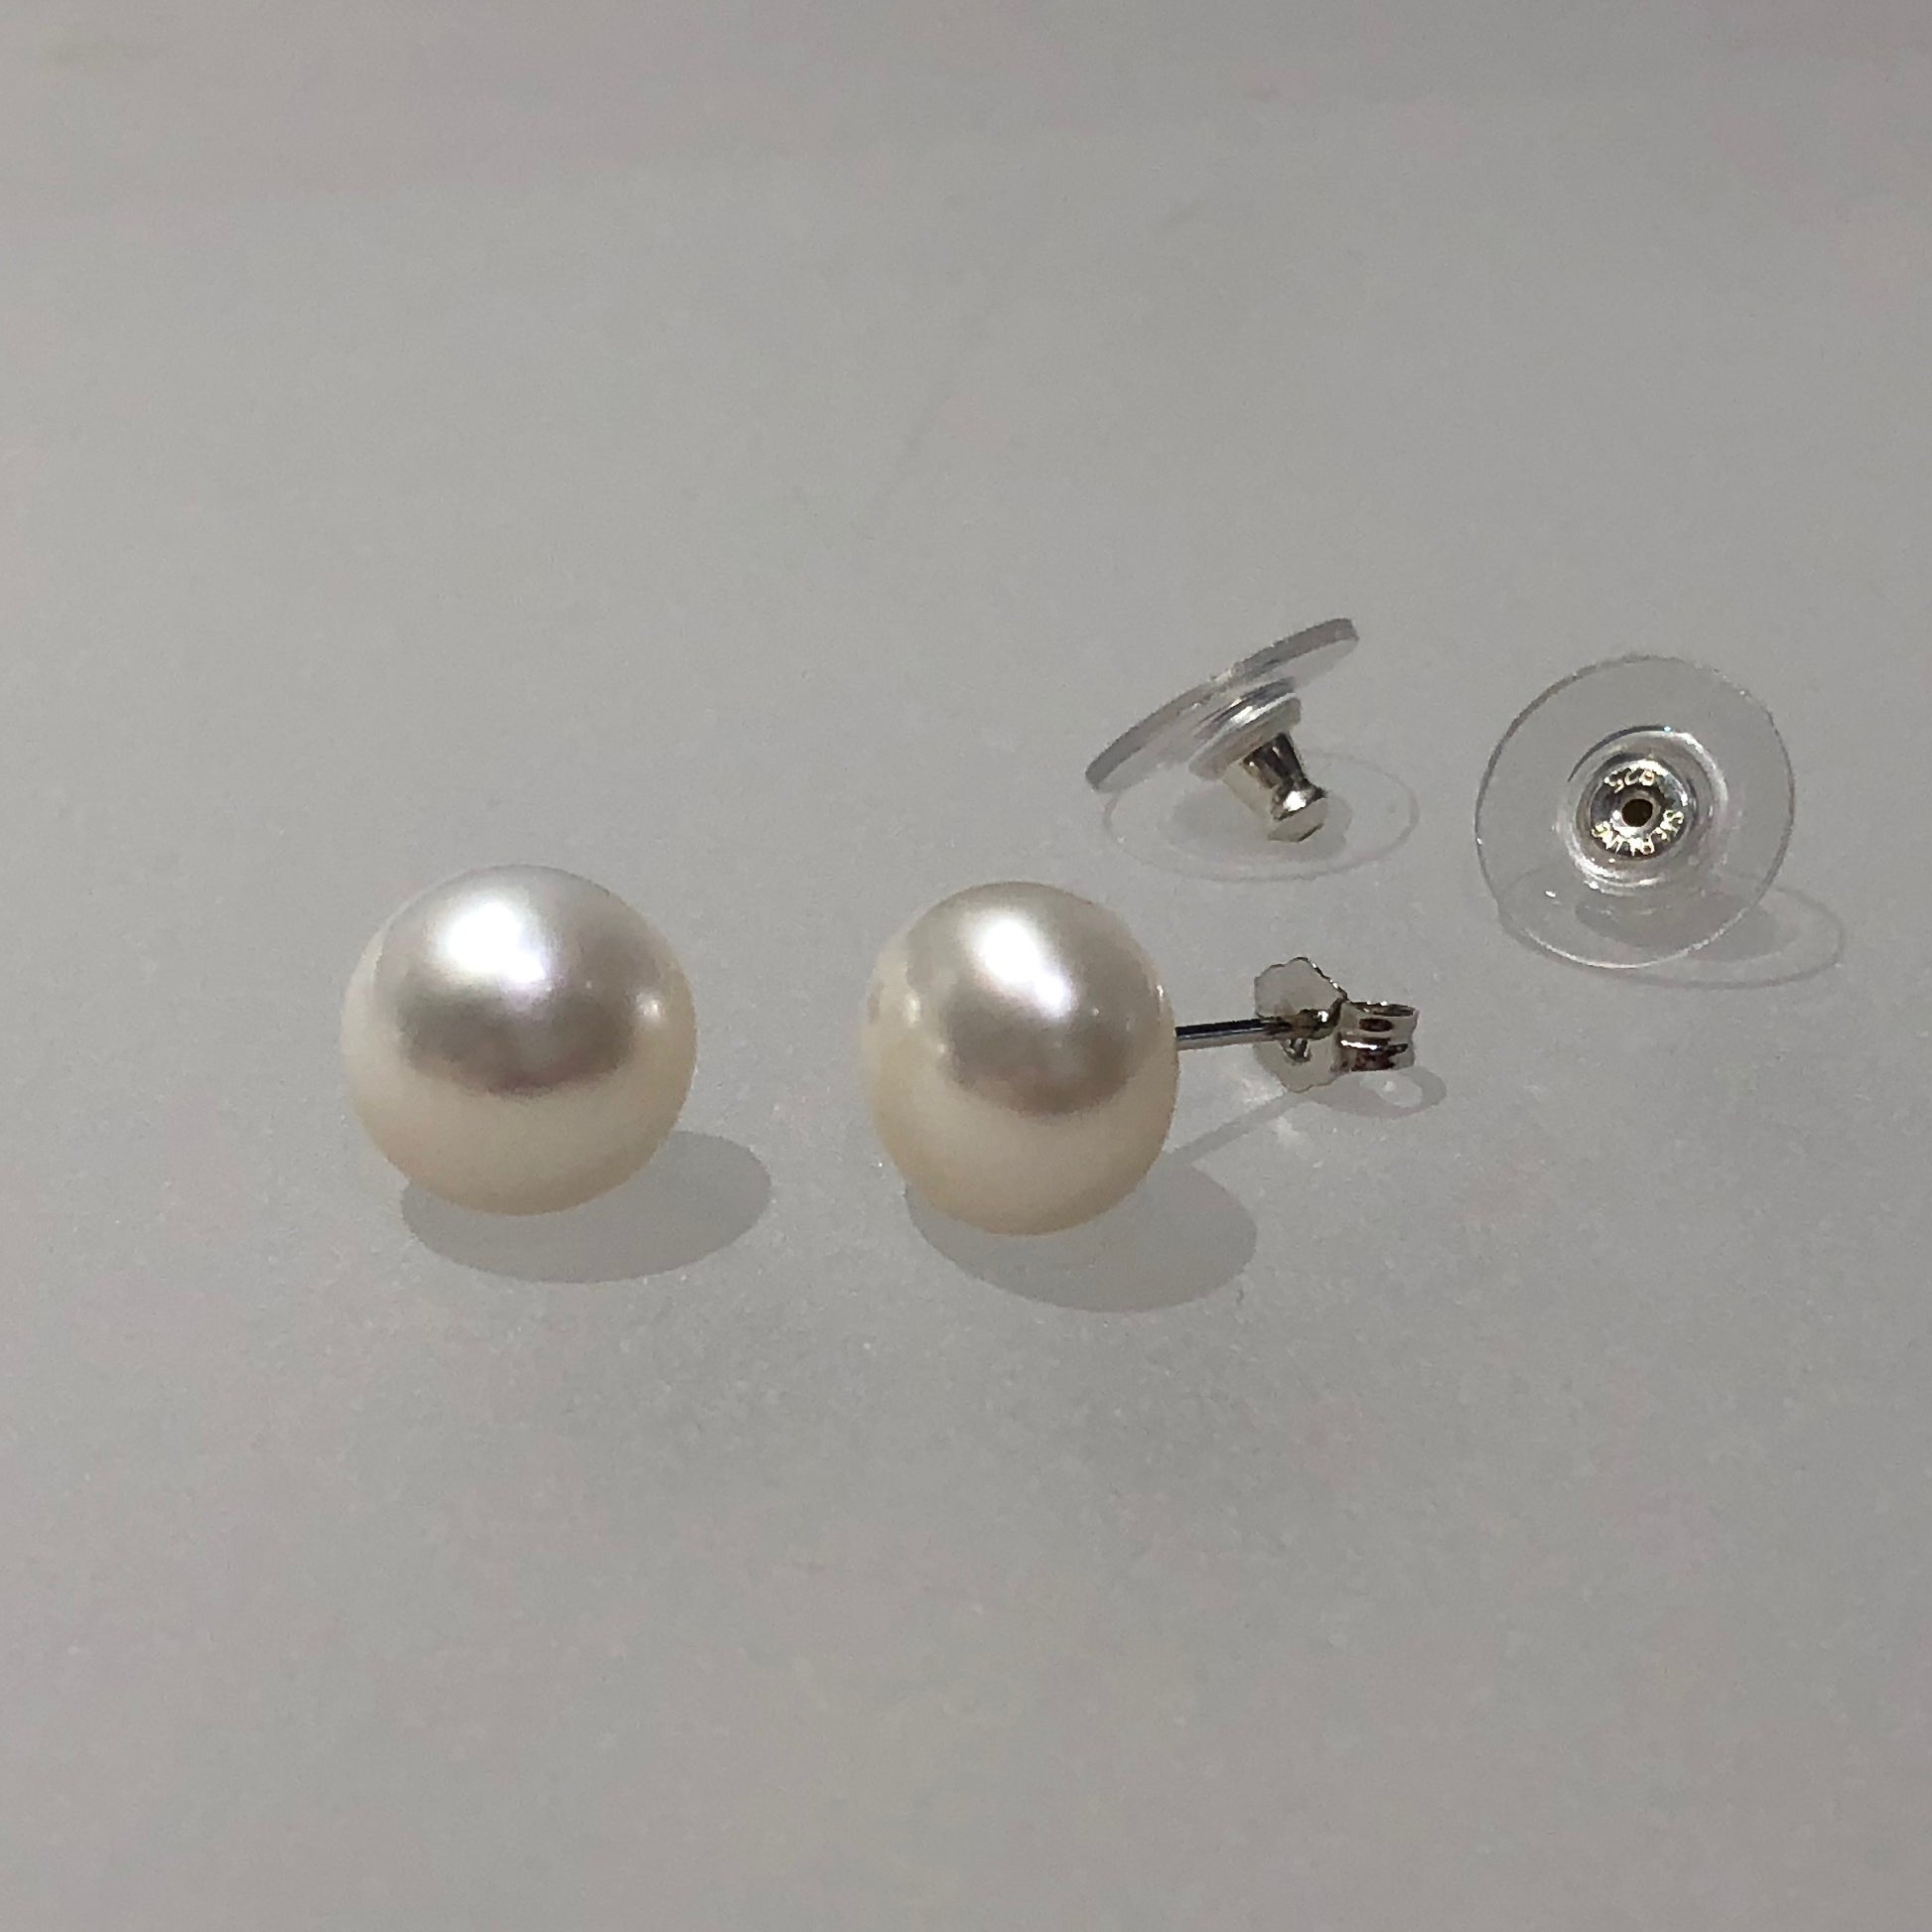 Arpaia Jewelry 11-11.5 white button Cultured Pearl Stud Earrings in Silver